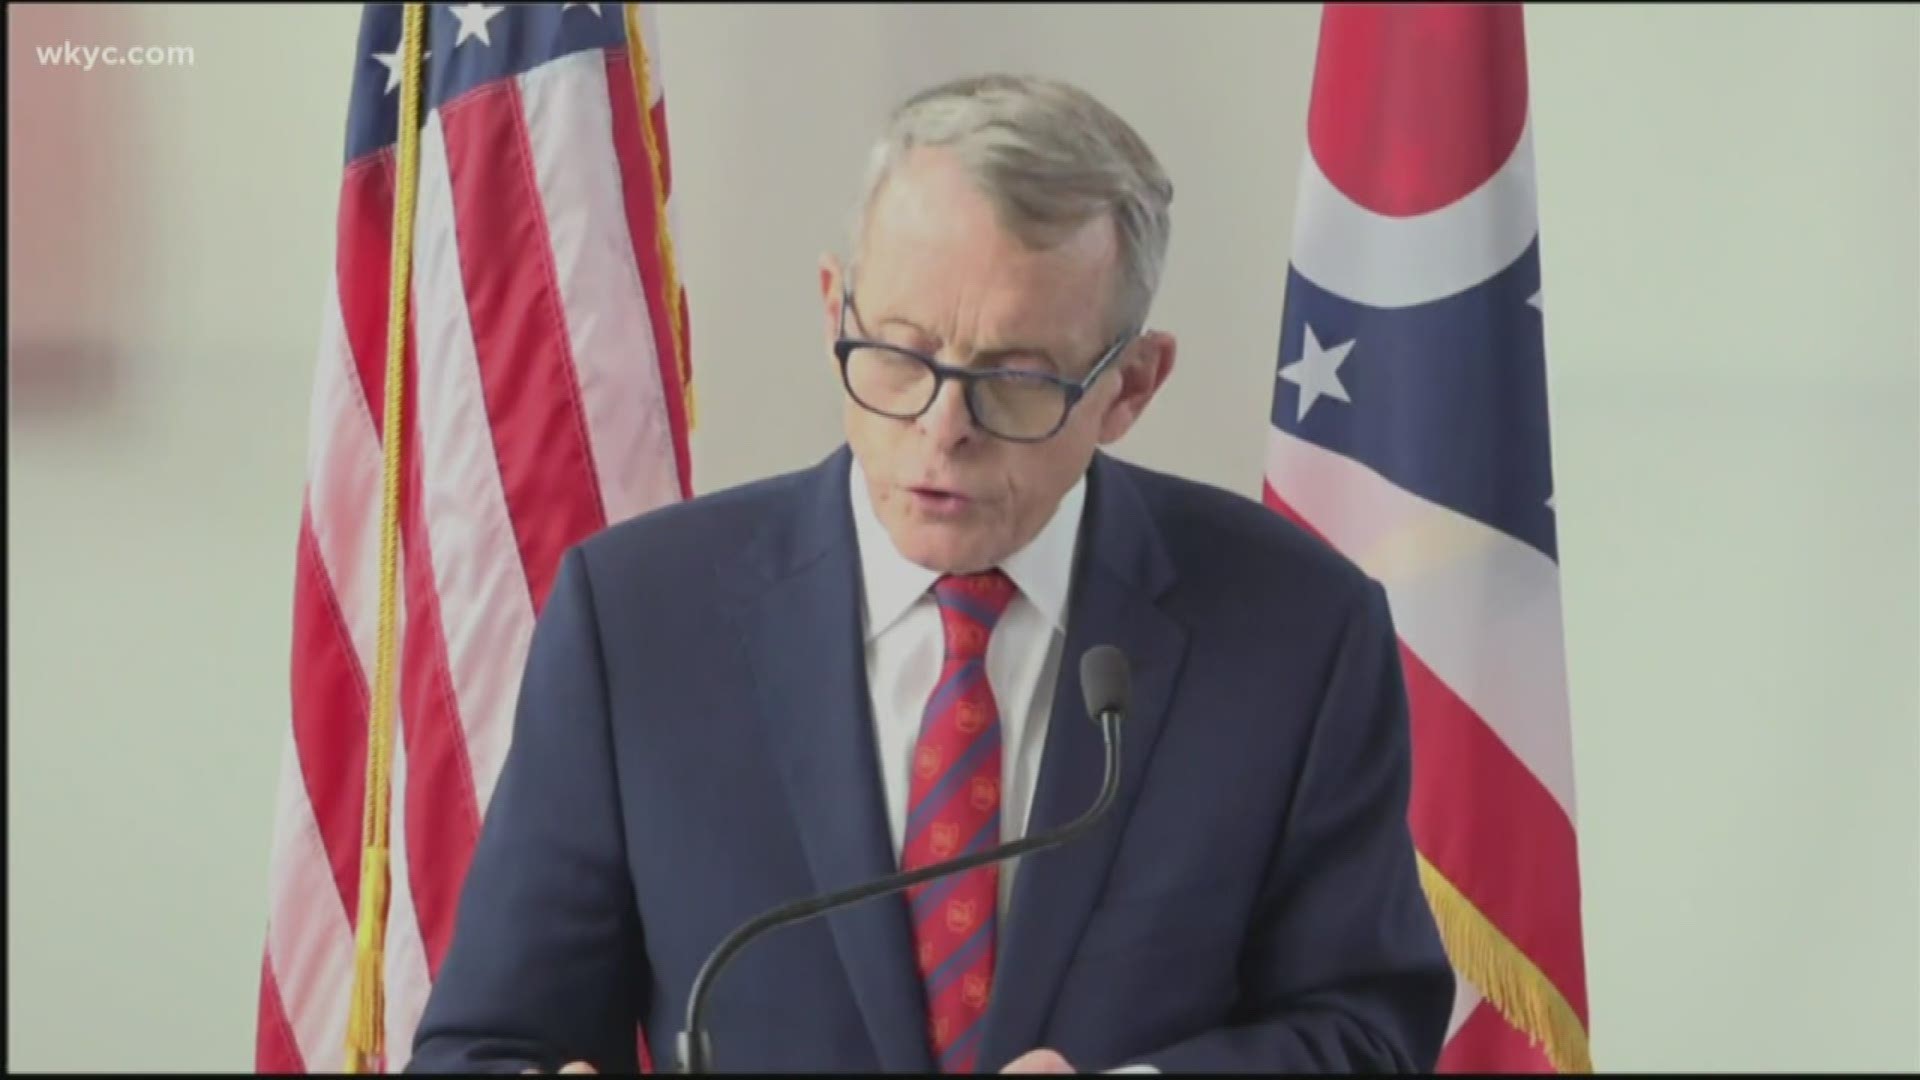 DeWine called the plan "a horrible business decision." Members of Congress from both sides of the aisle have also ripped the plan.